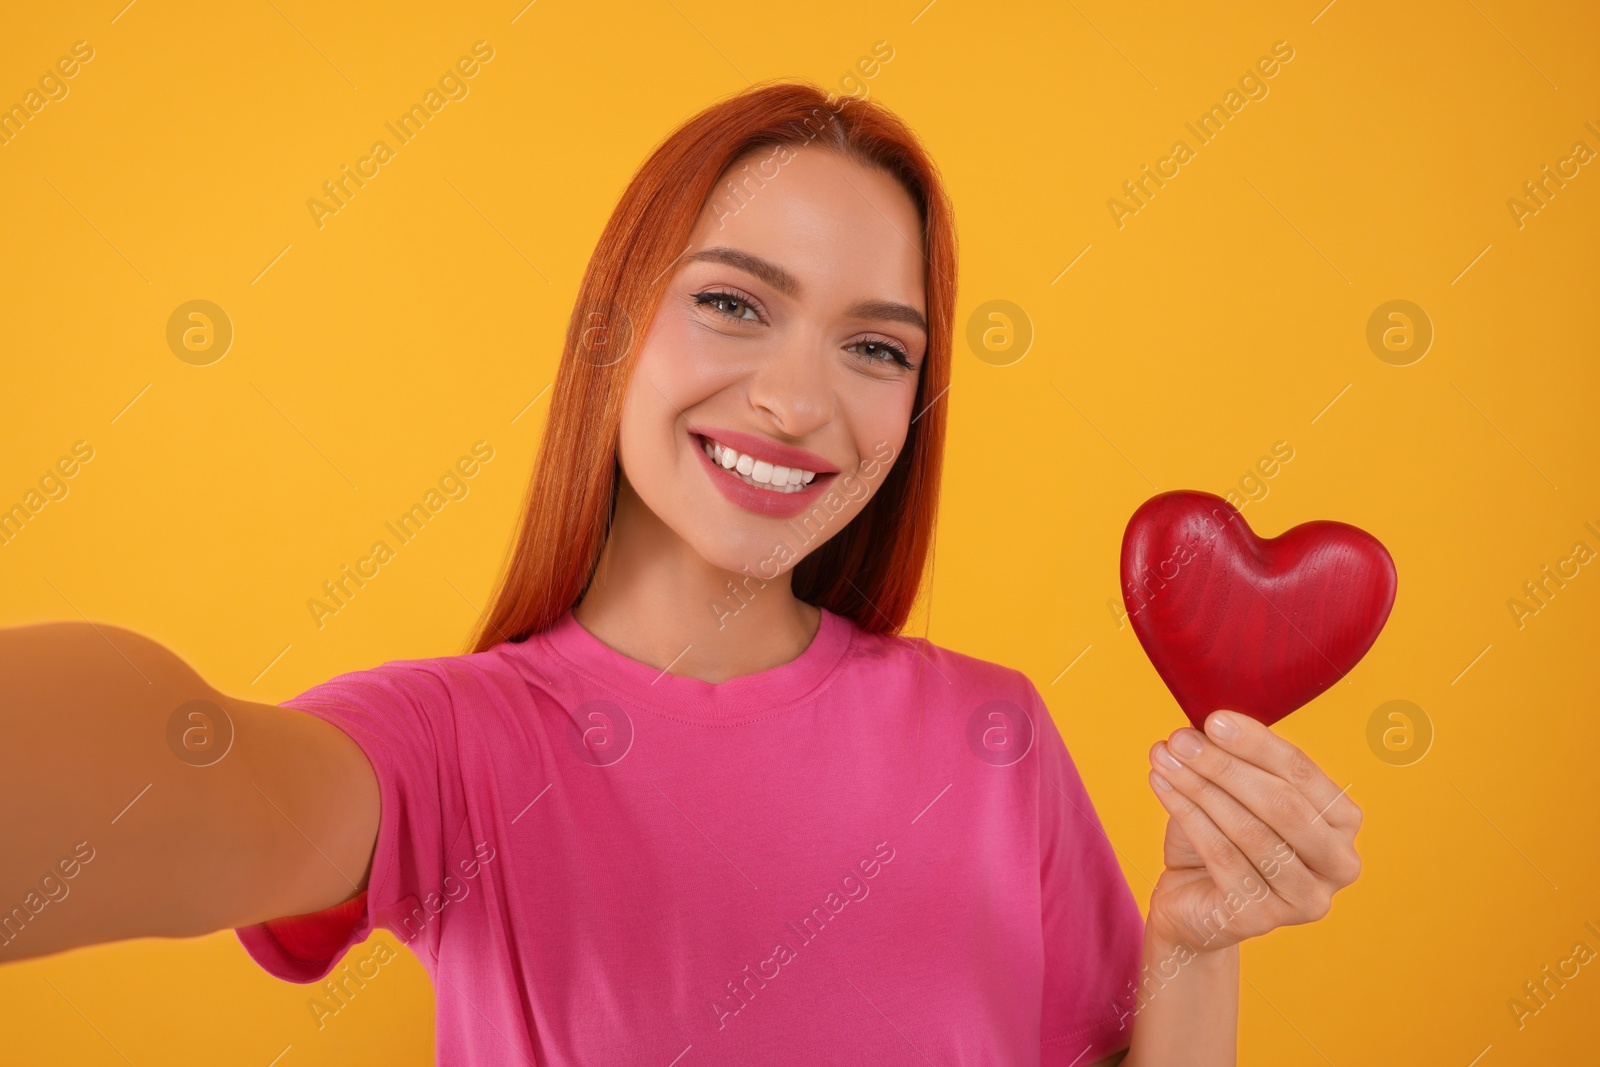 Photo of Beautiful happy woman with red heart taking selfie on orange background